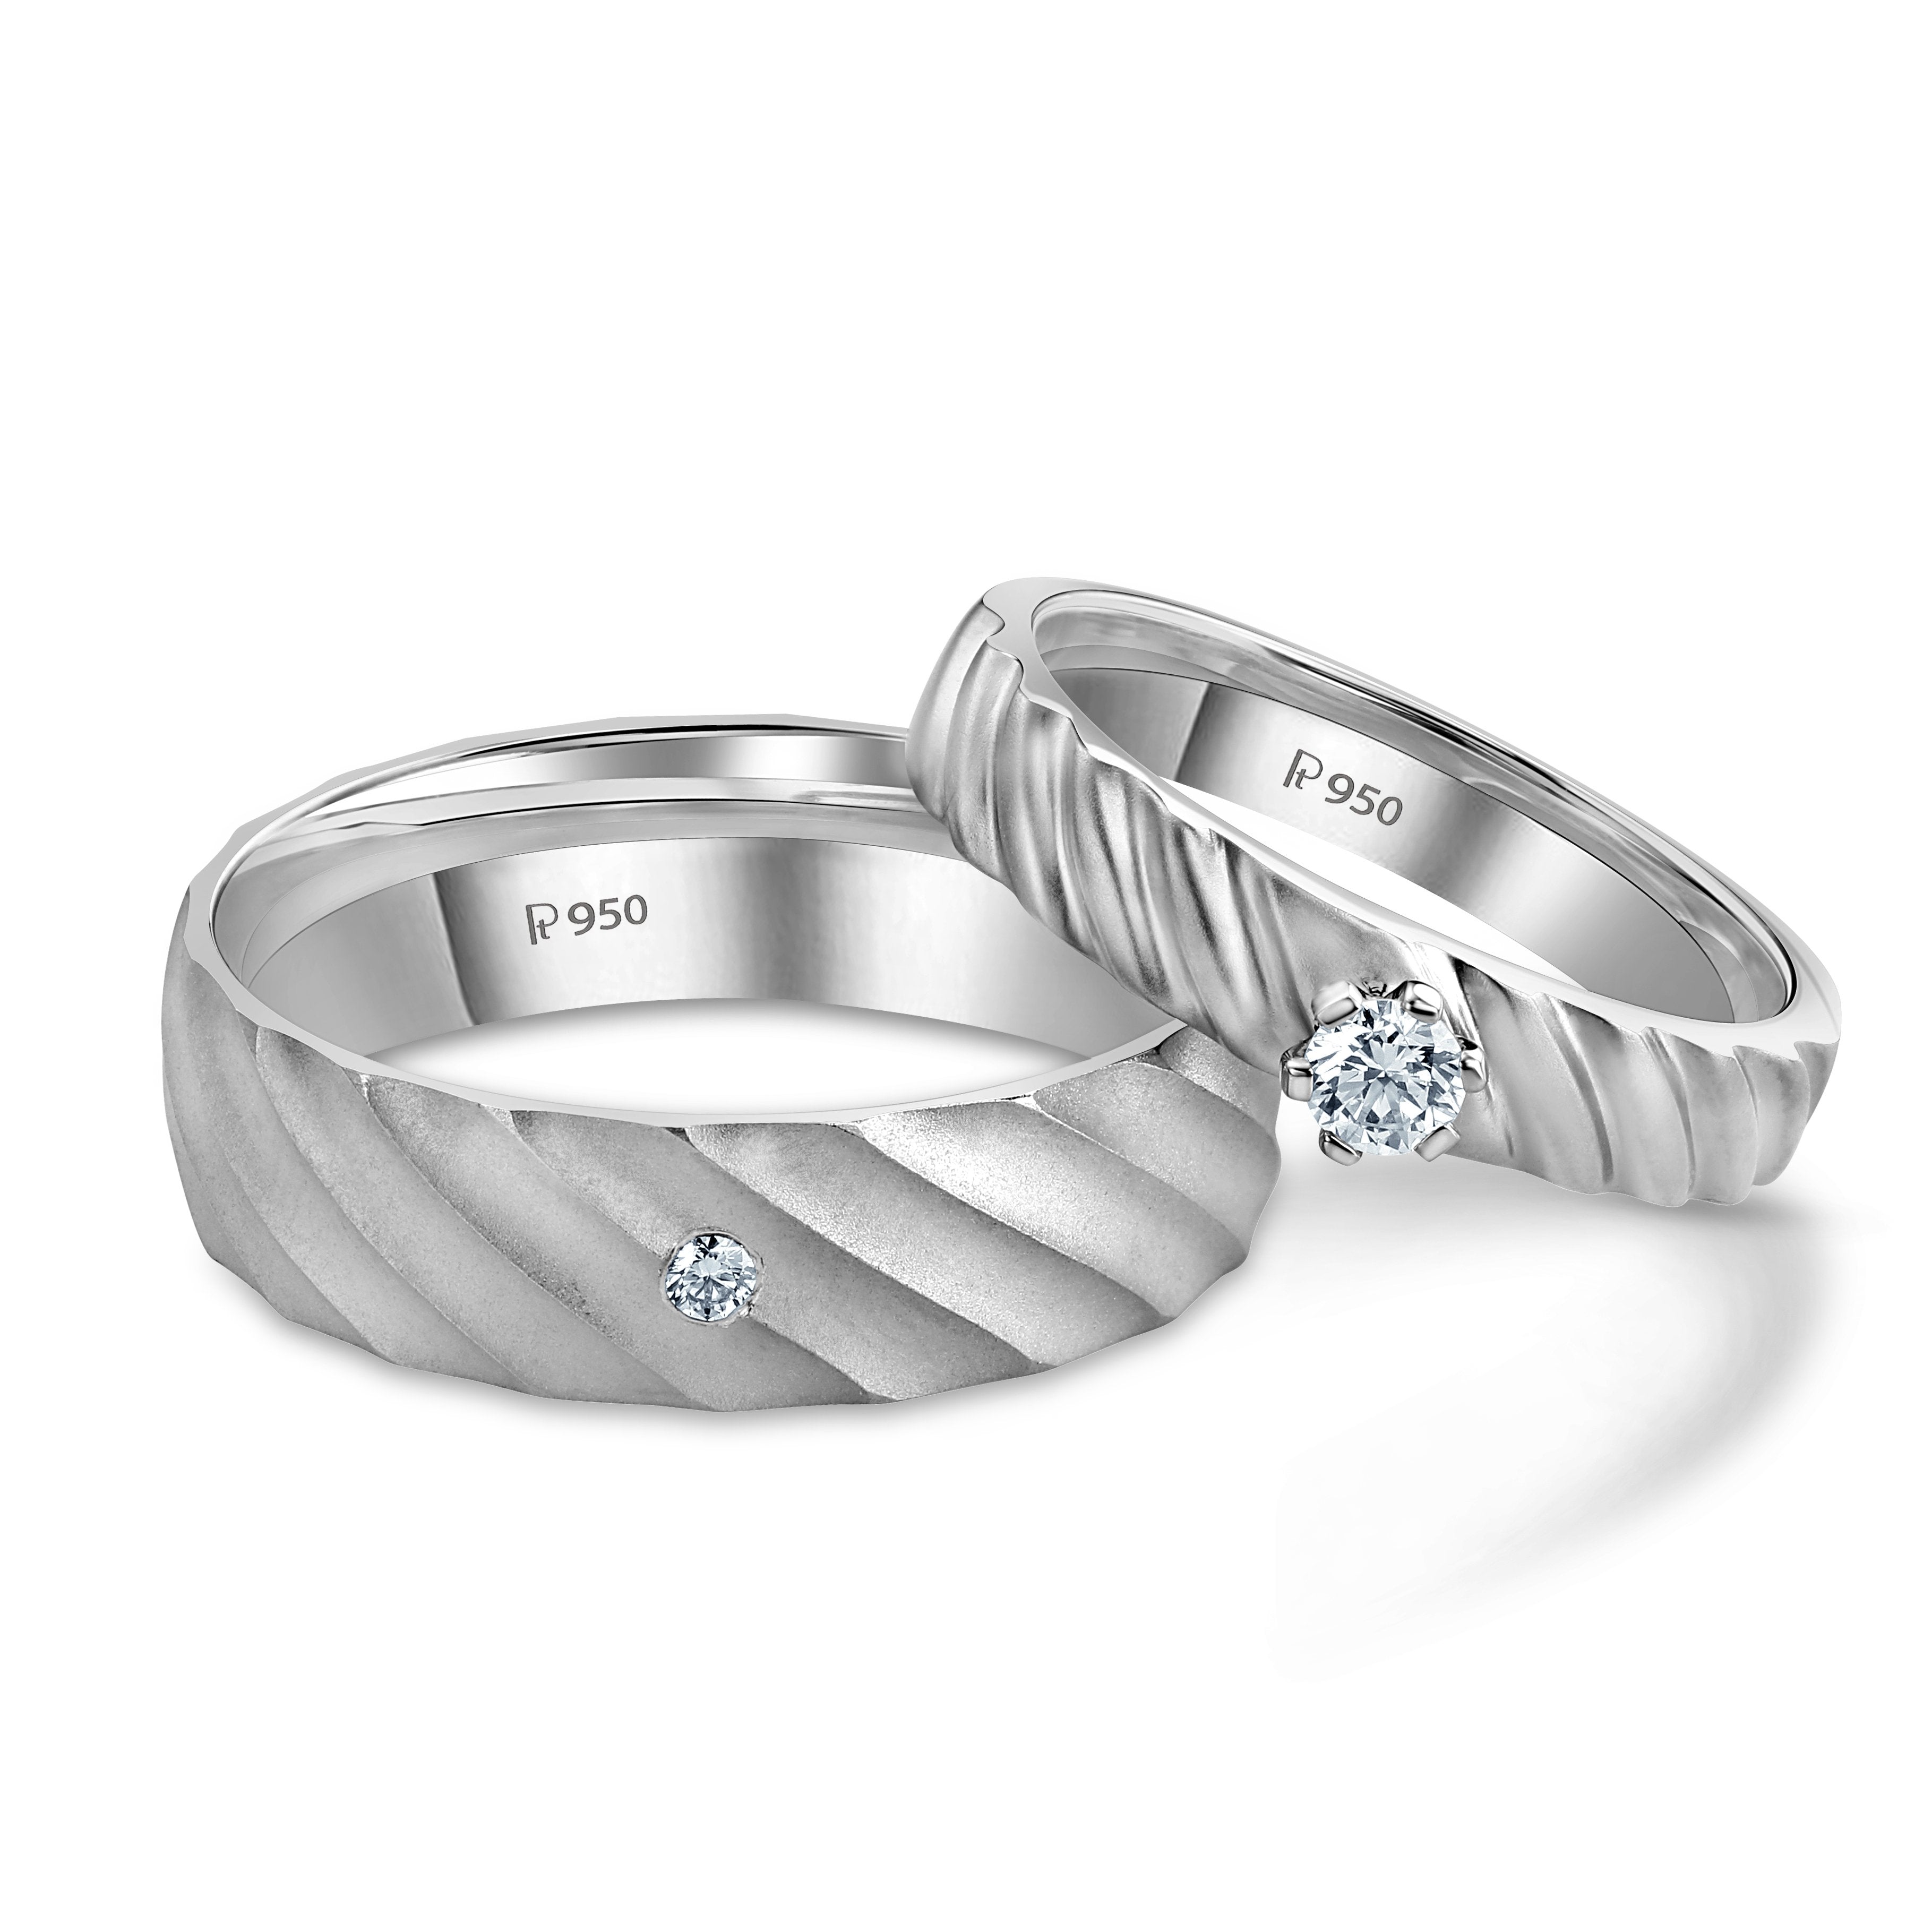 Platinum Couple Rings | Platinum Rings For Couples